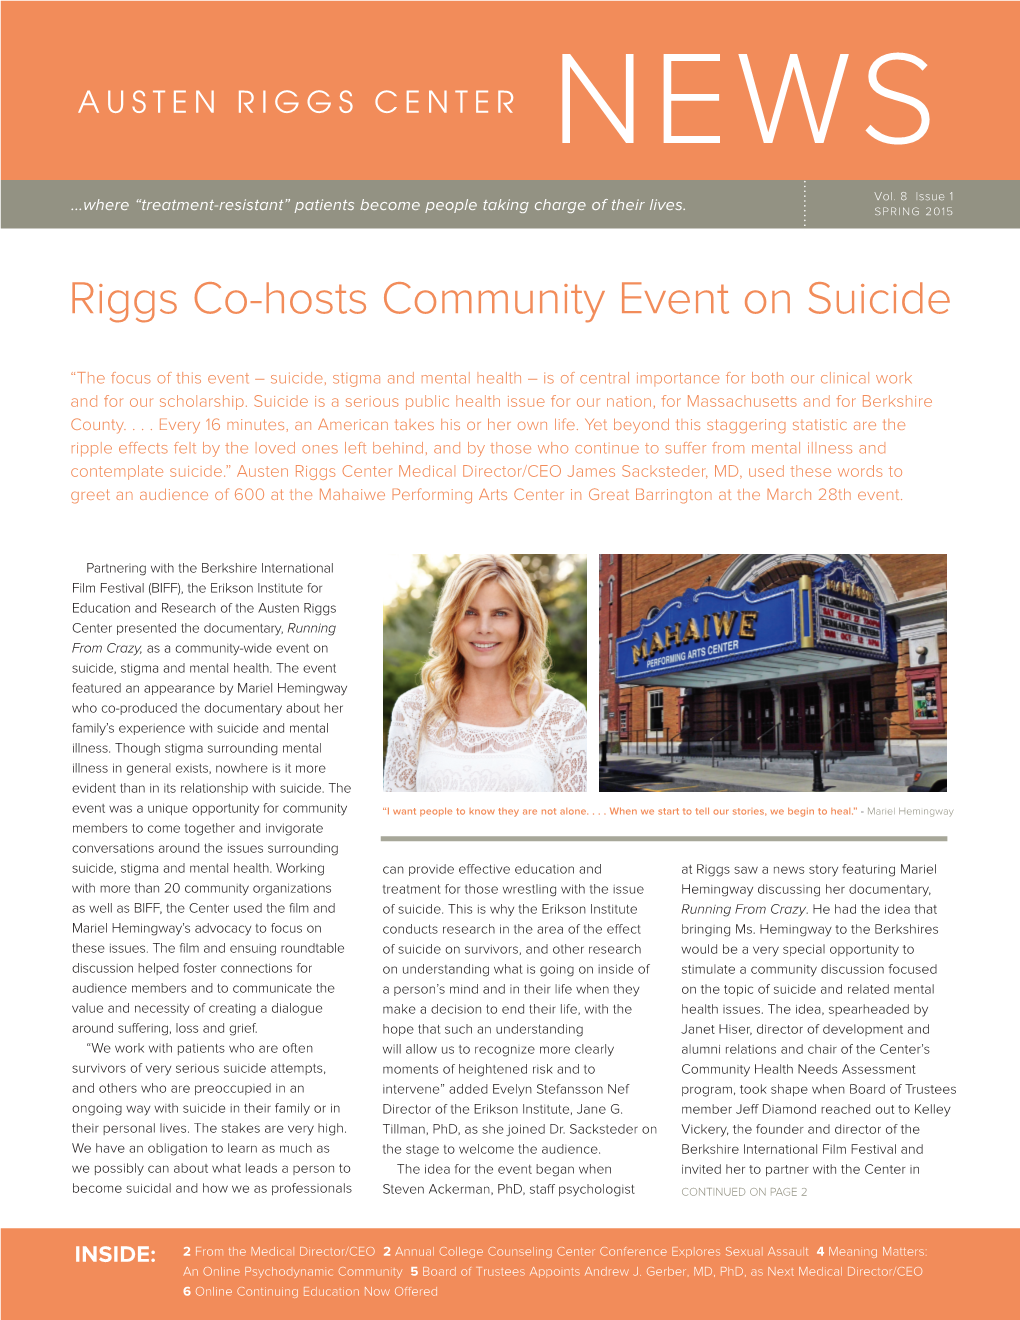 Riggs Co-Hosts Community Event on Suicide